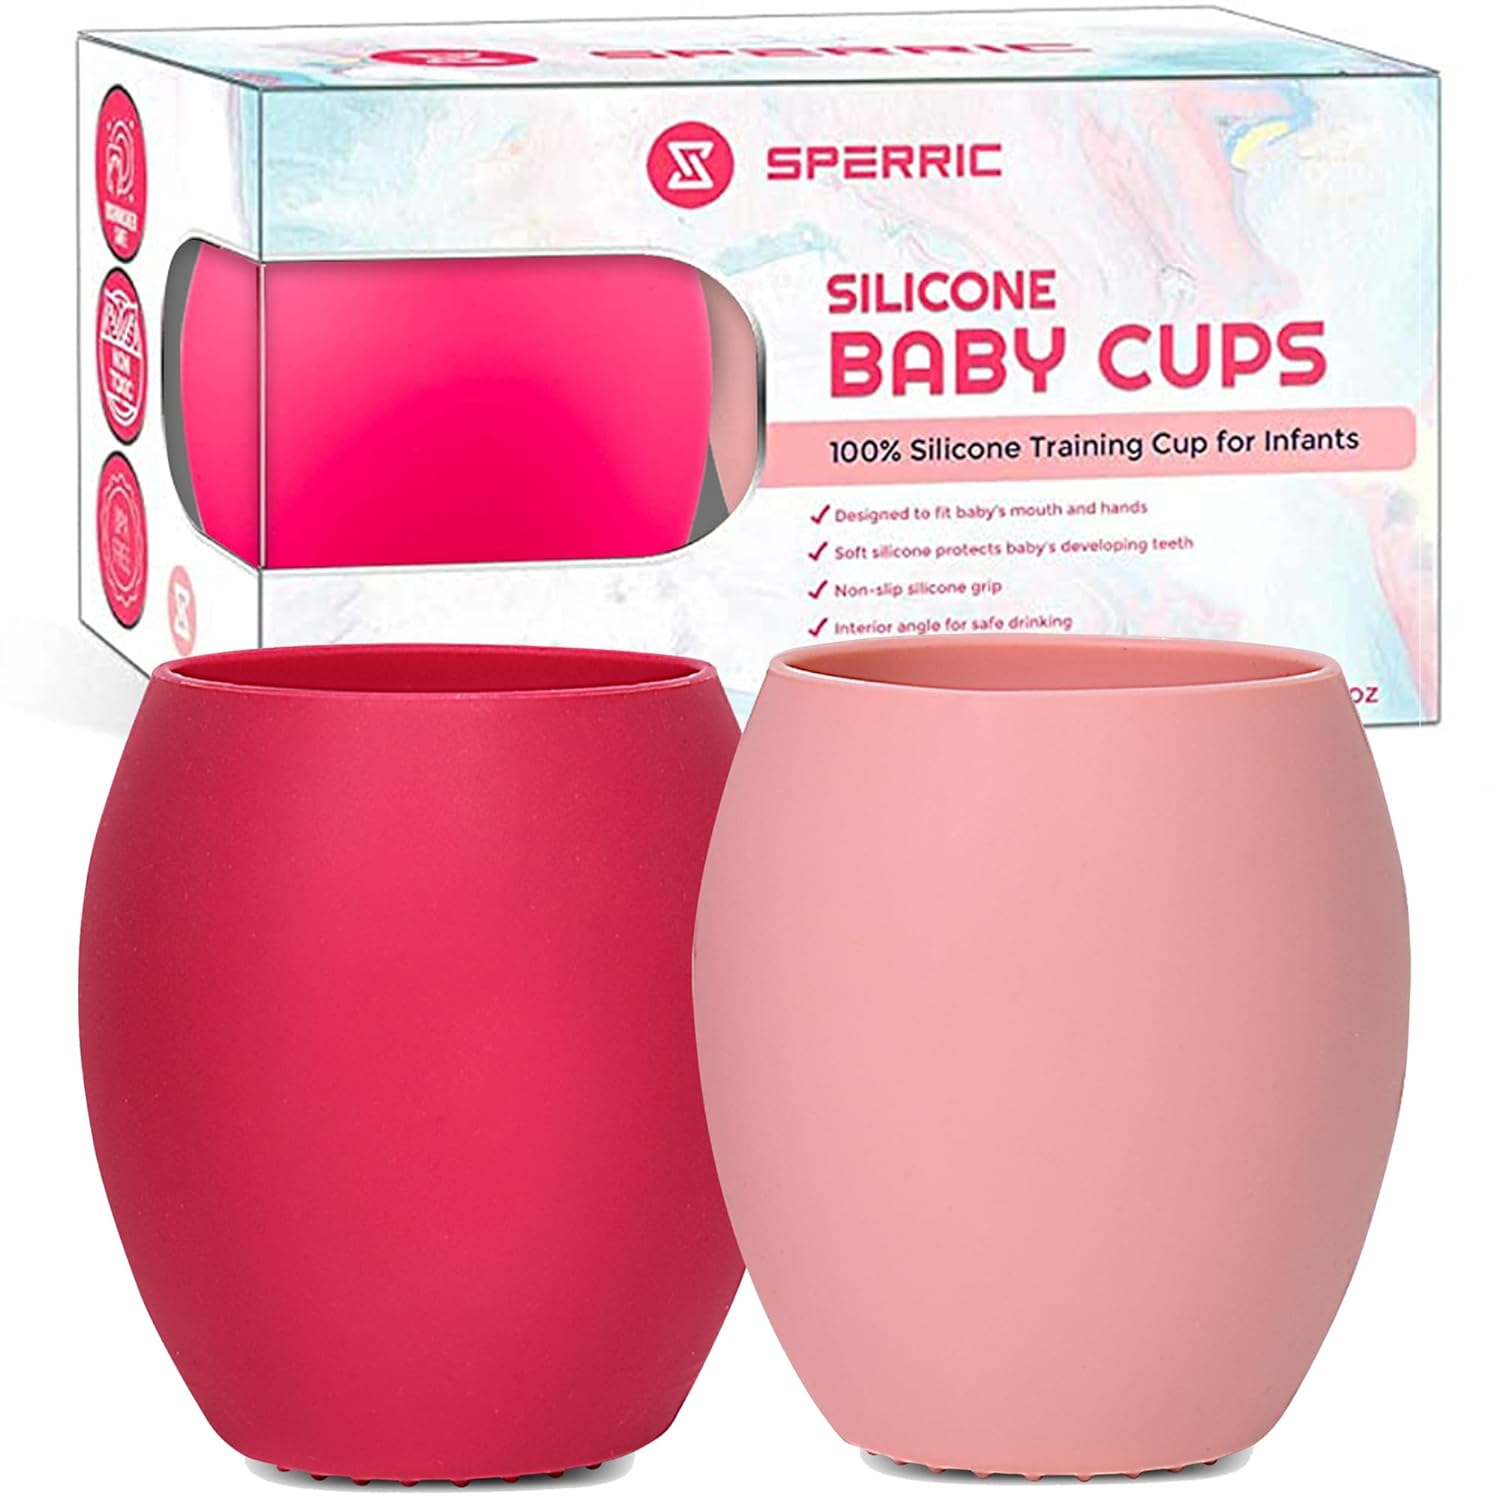 Silicone Baby Cup - Toddler Training Cup - Open Cup for Baby Led Weaning 2 Pack of No Spill Sippy Baby Cups - Soft & Gentle on Gums BPA Free Silicone Baby Cups